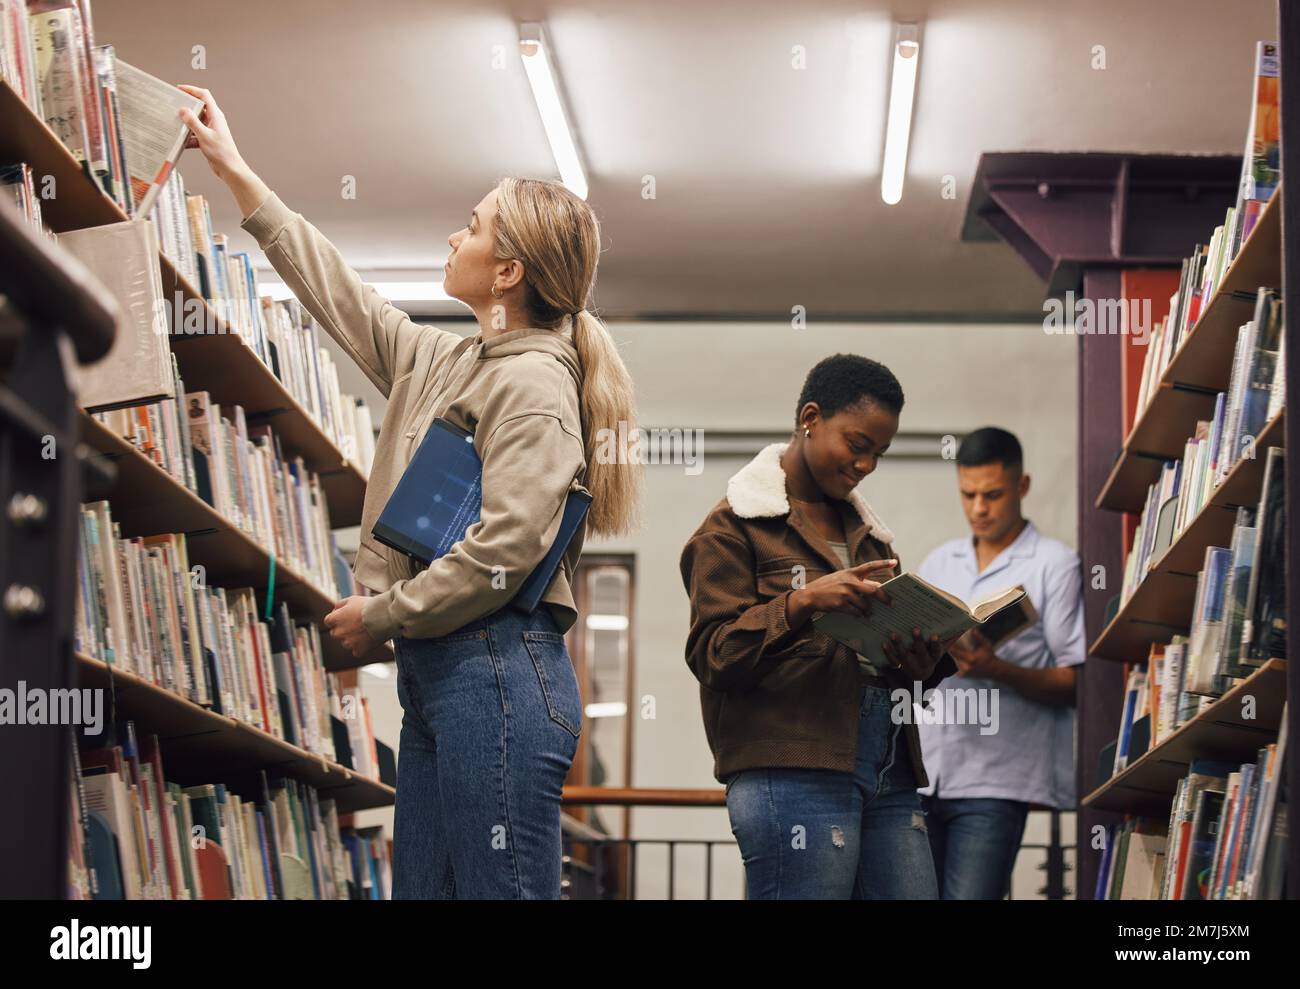 Education, book search or girl in library at university, college or school bookshelf learning or studying. Research, scholarship or gen z student Stock Photo